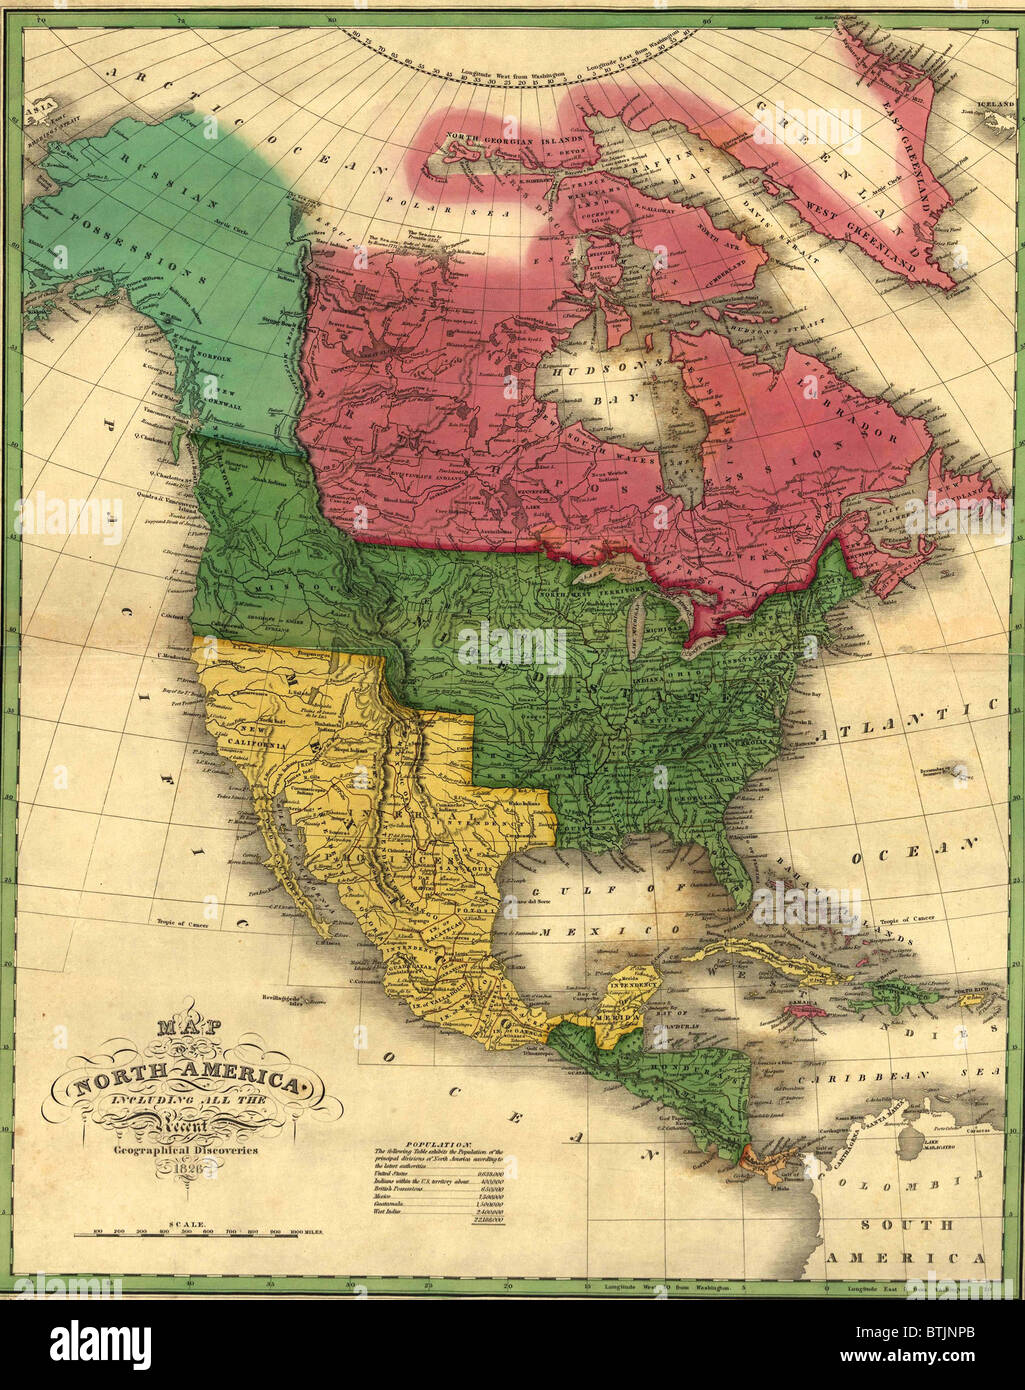 North American political boundaries in 1826. Image shows the Louisiana Purchase and Oregon Territory. Alaska is labeled as a Russian possession. Canada does not yet reach the Pacific Ocean. Mexico will be reduced after the Mexican War, 1847-49. Stock Photo